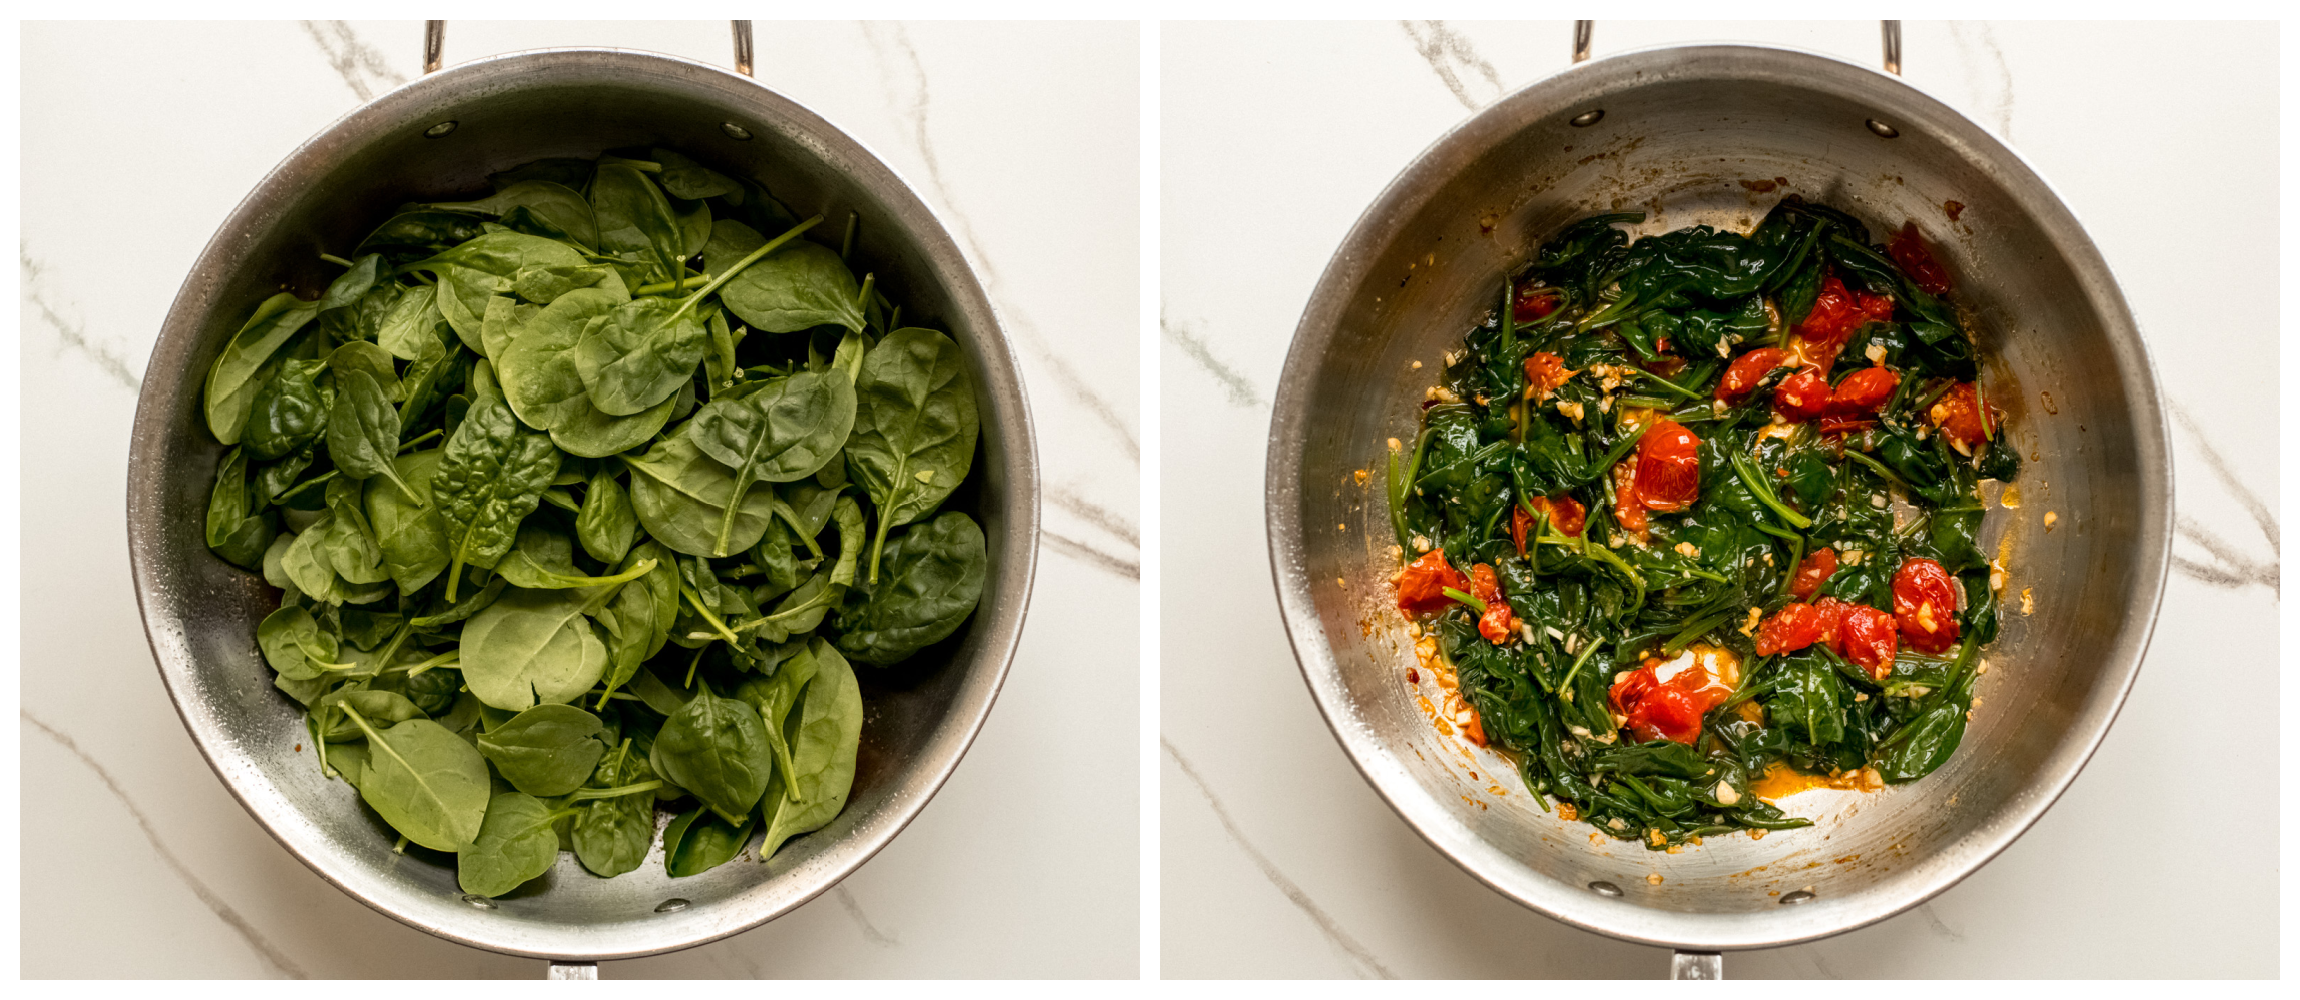 two pan photos showing baby spinach in one, and cooked baby spinach with tomatoes in second.